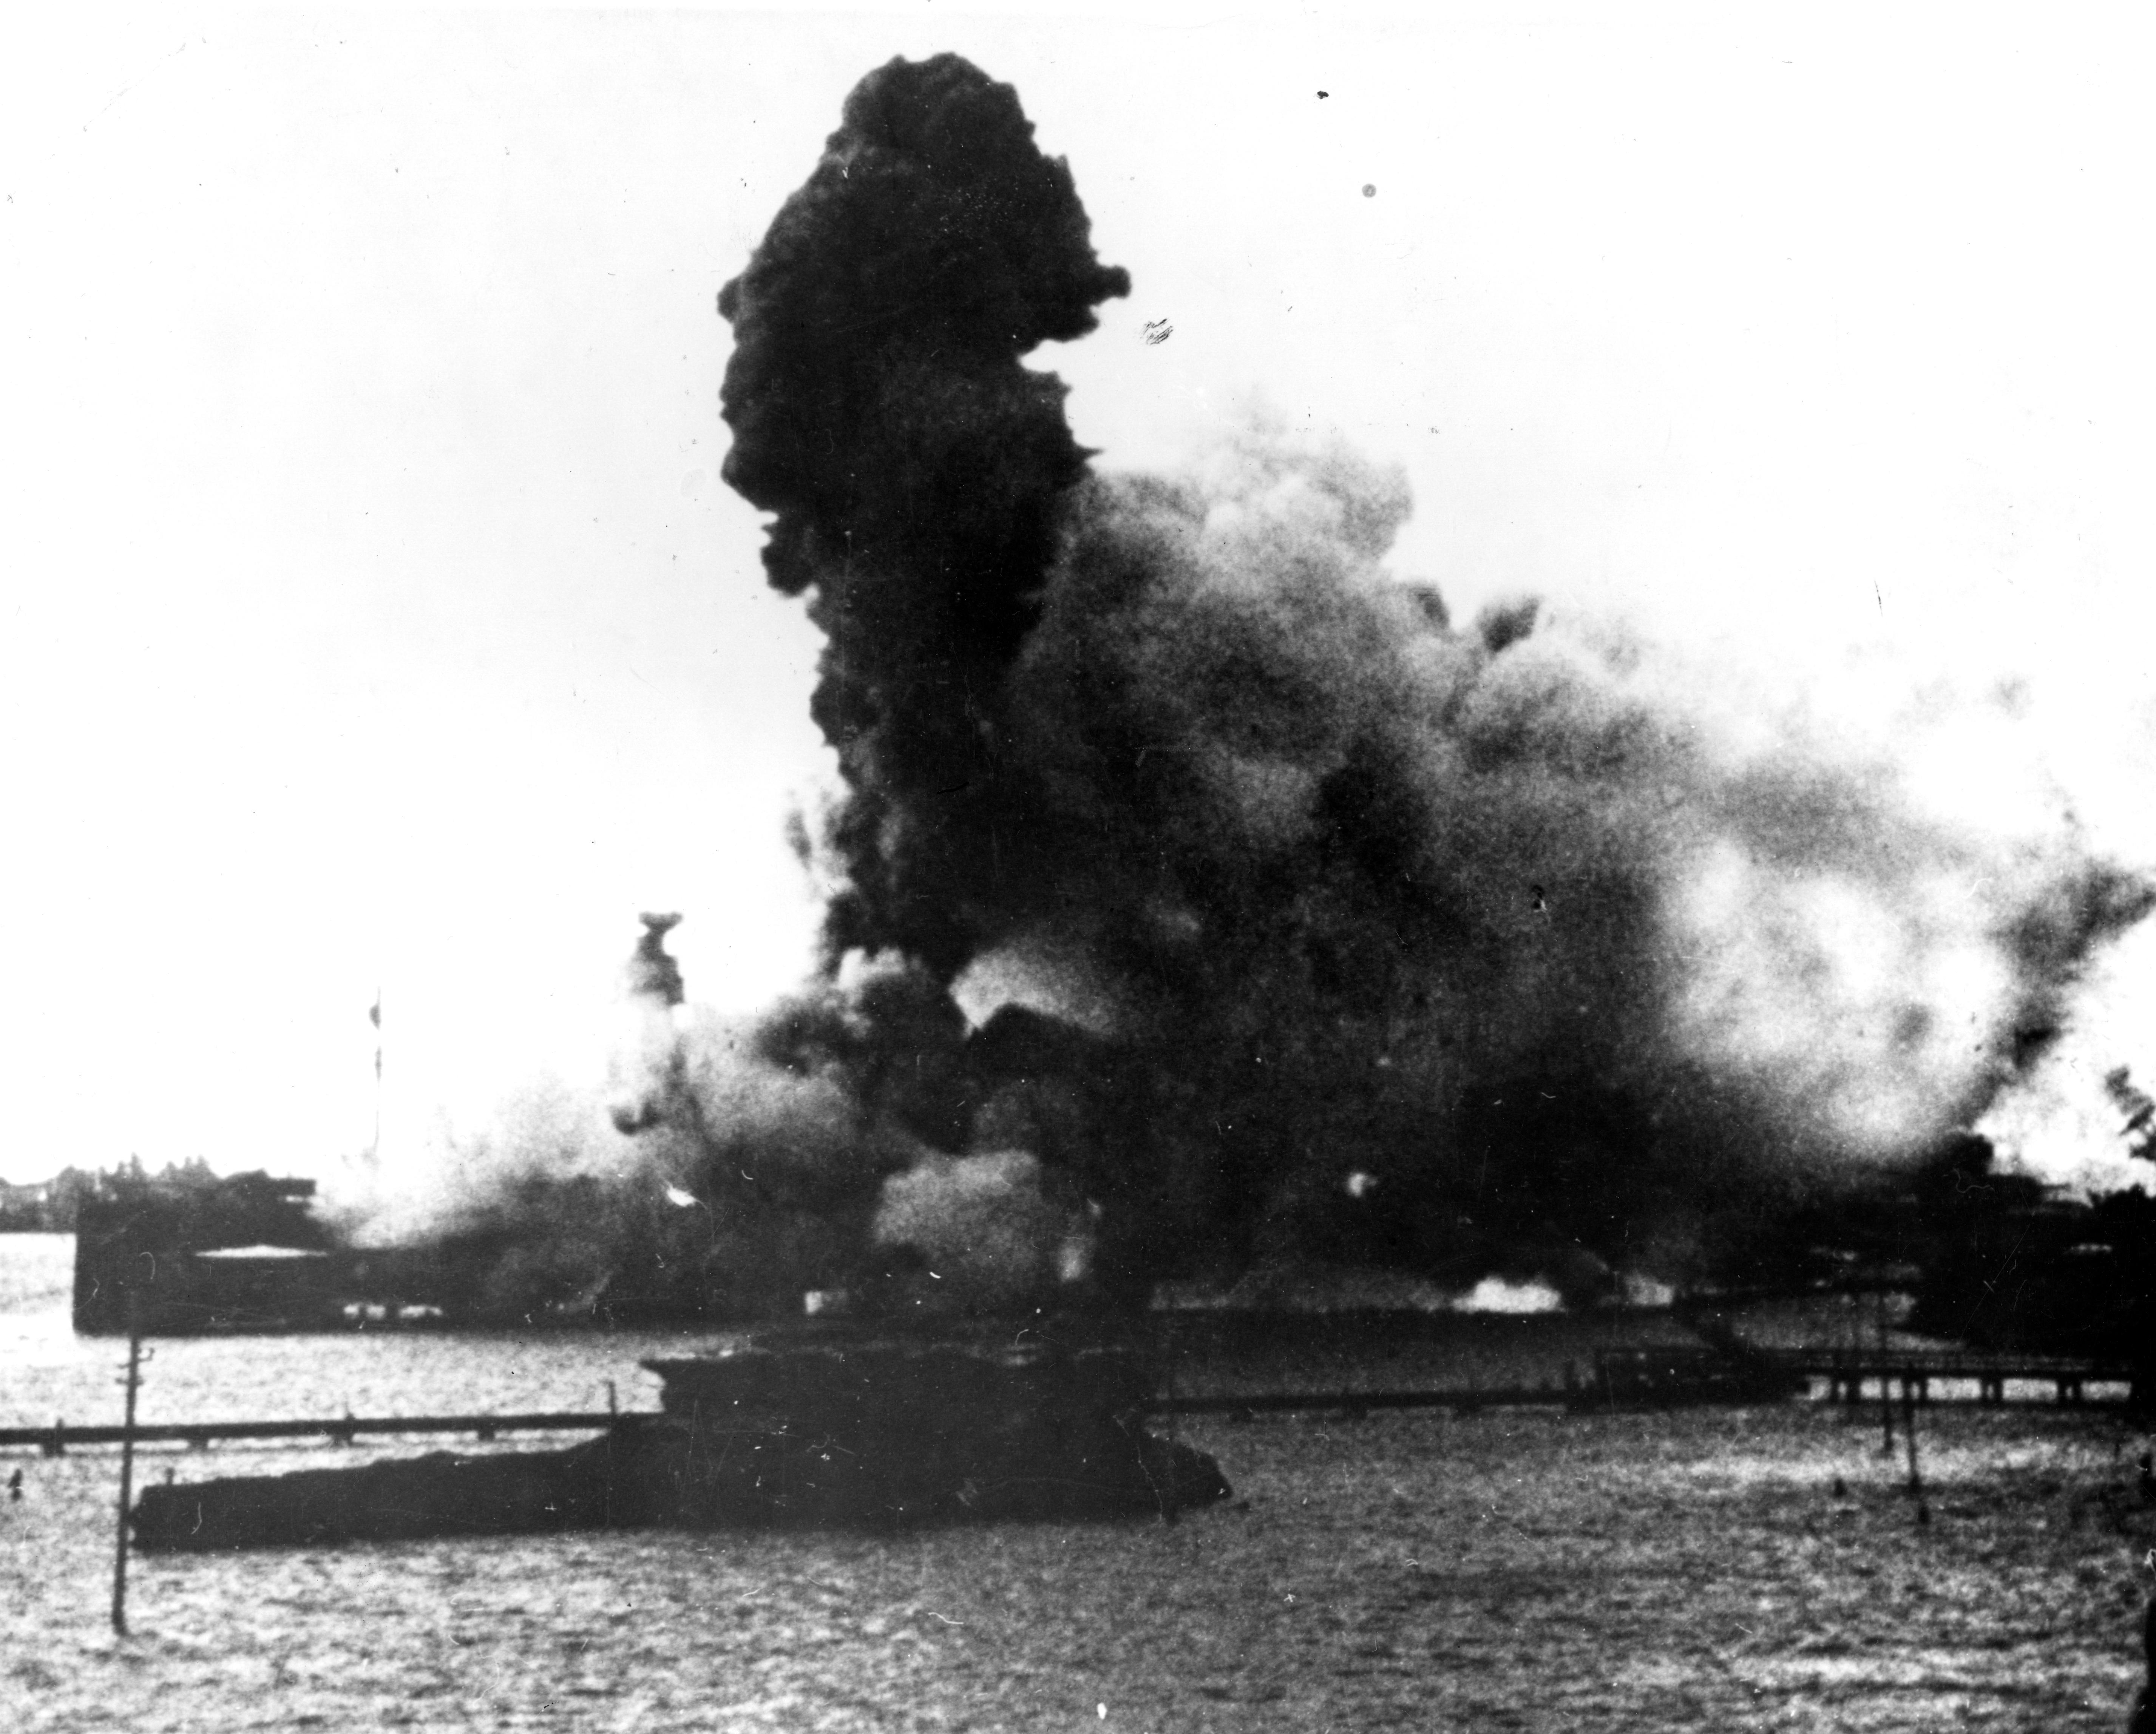 USS Arizona's forward magazines exploding during the Pearl Harbor attack, US Territory of Hawaii, shortly after 0800 hours, 7 Dec 1941, photo 2 of 2